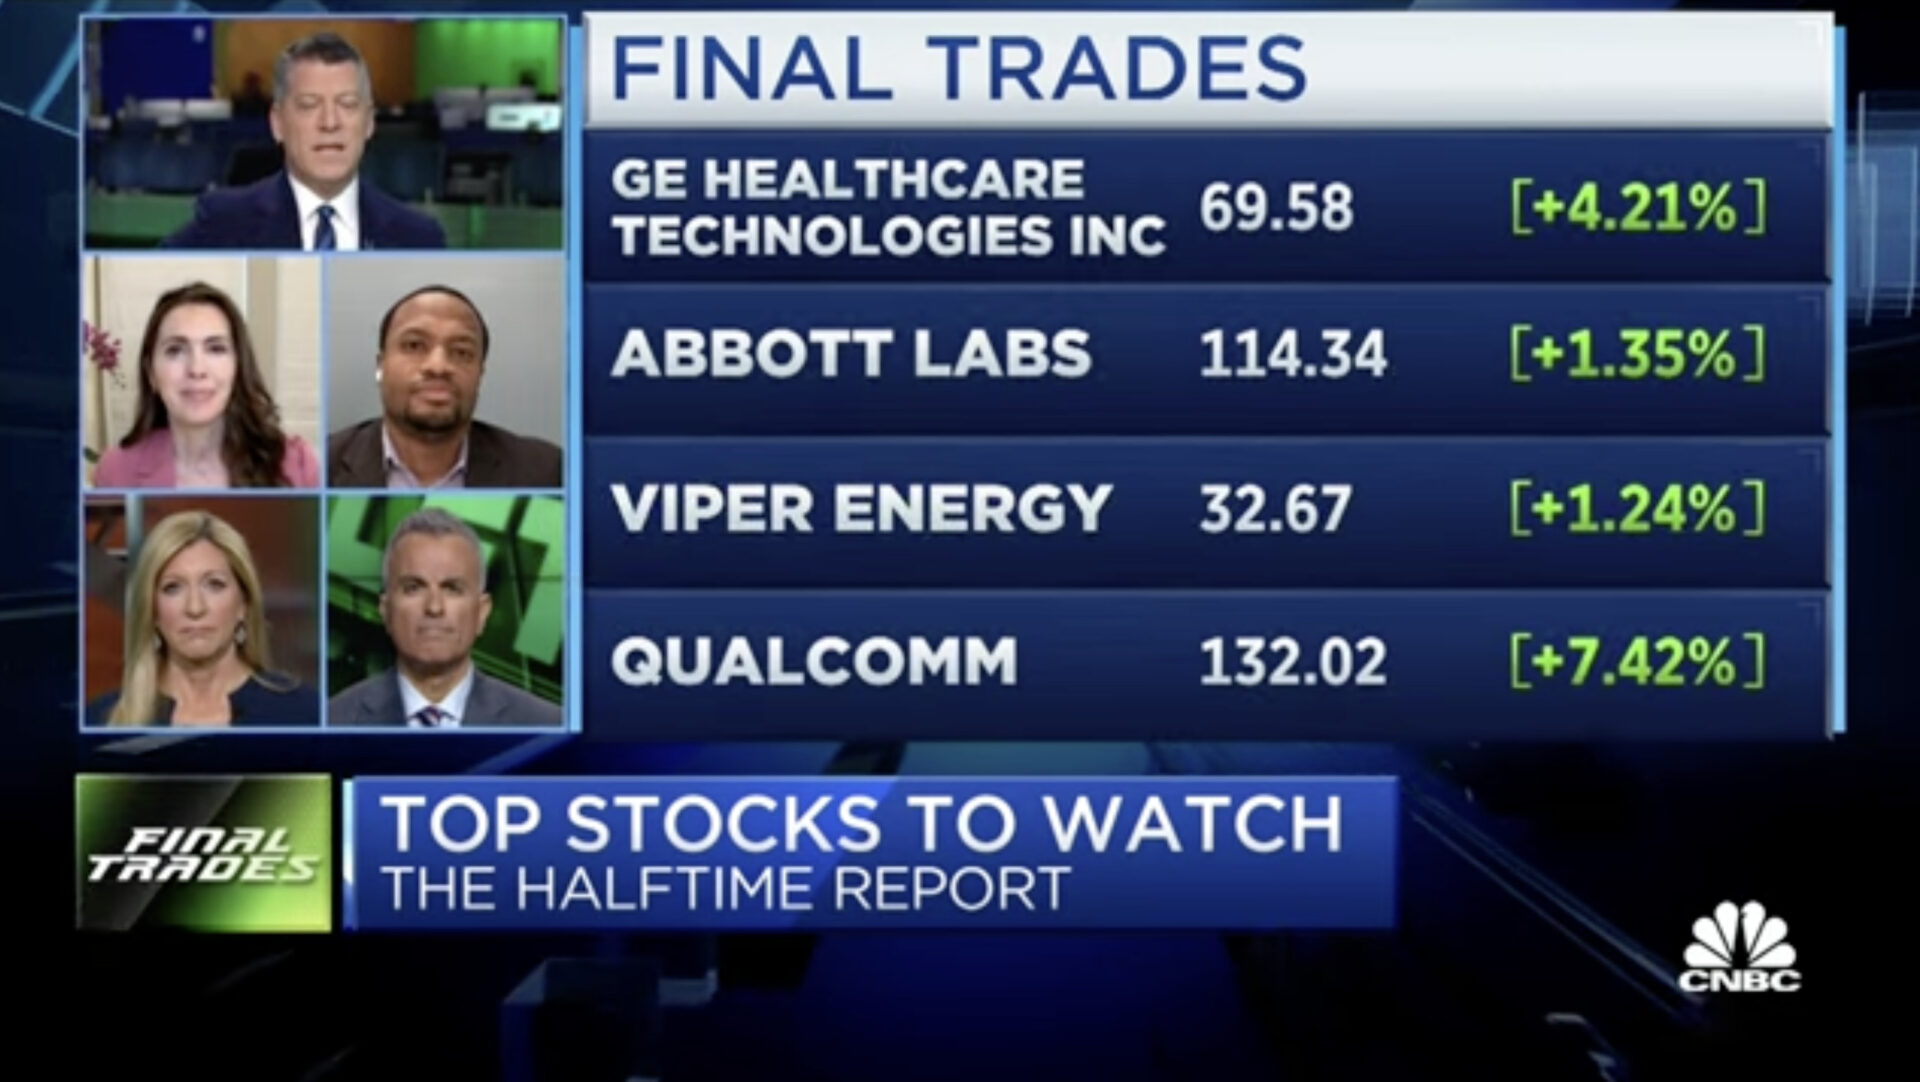 Final Trades: Abbott Labs, GE Healthcare, Viper Energy and more